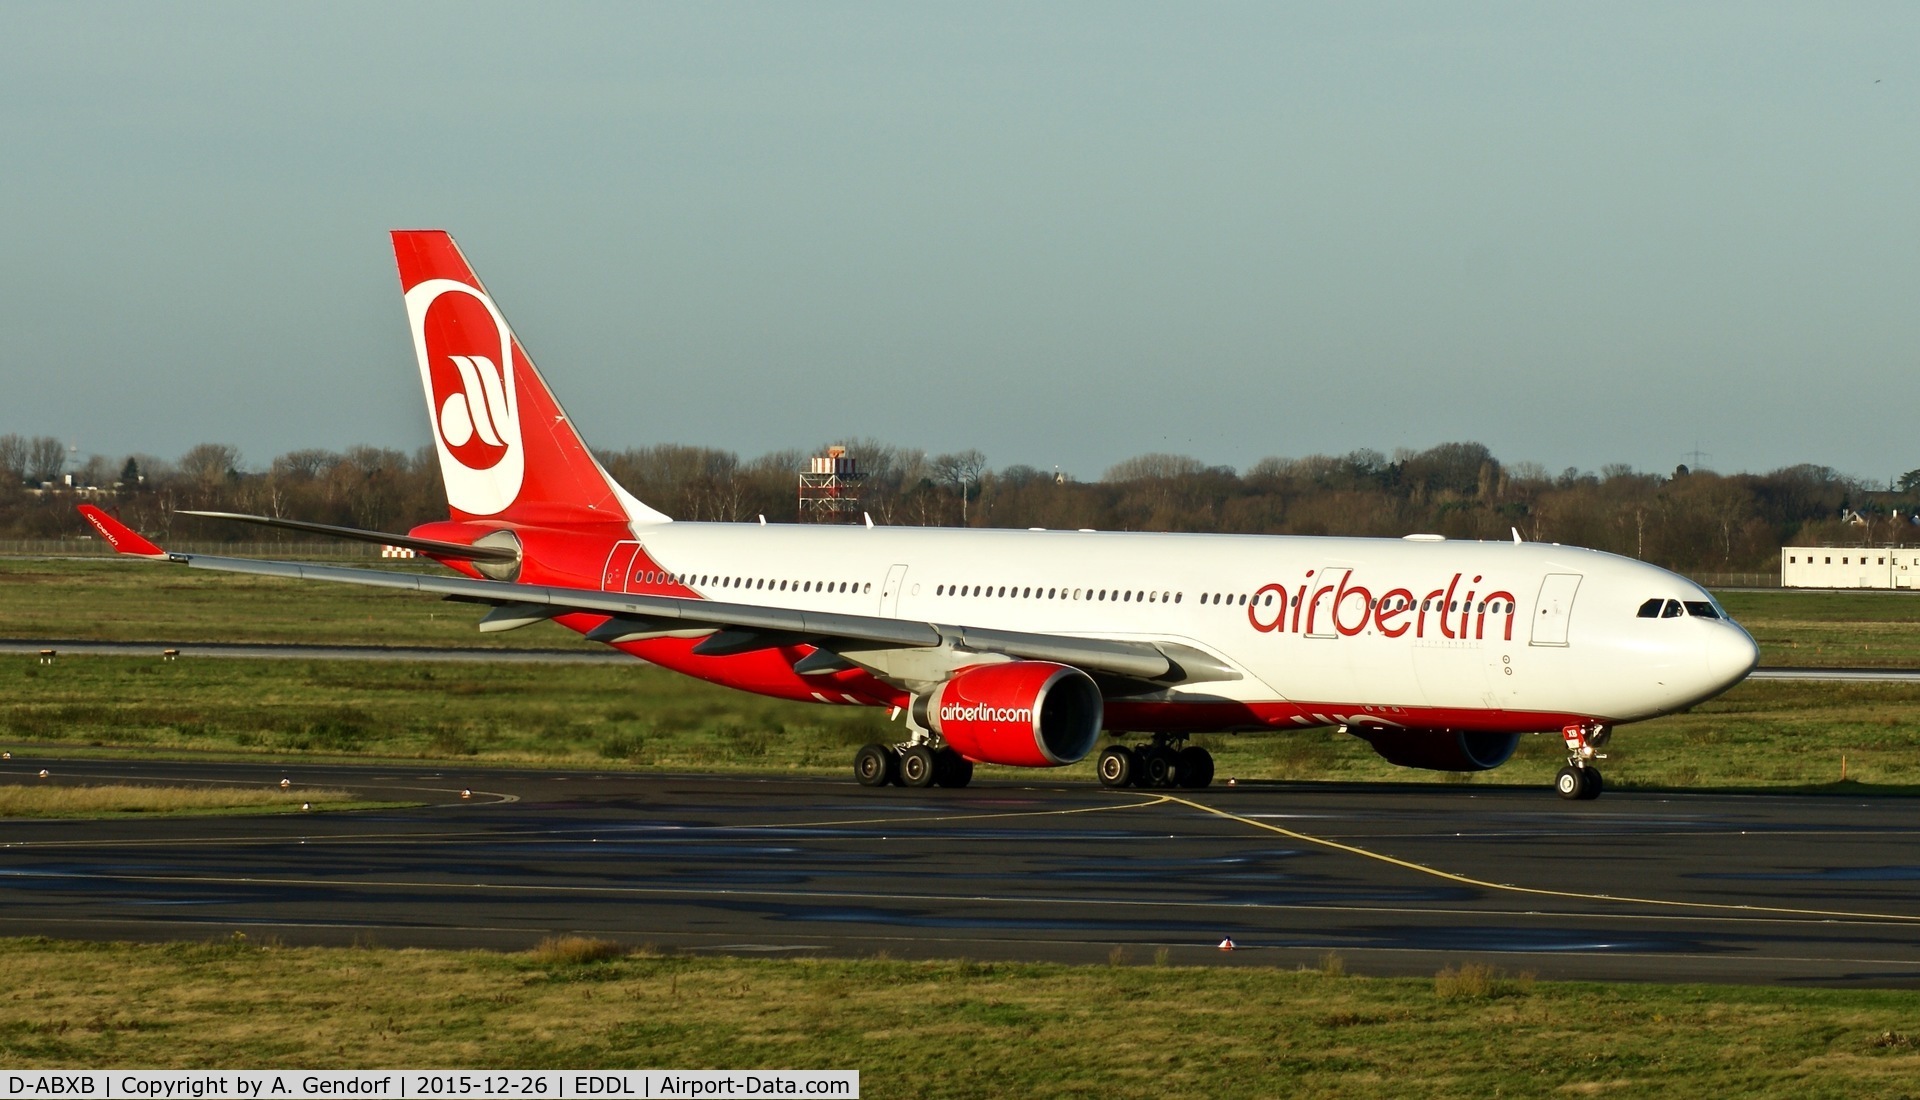 D-ABXB, 2000 Airbus A330-223 C/N 322, Air Berlin, is here on the taxiway at Düsseldorf Int'l(EDDL)